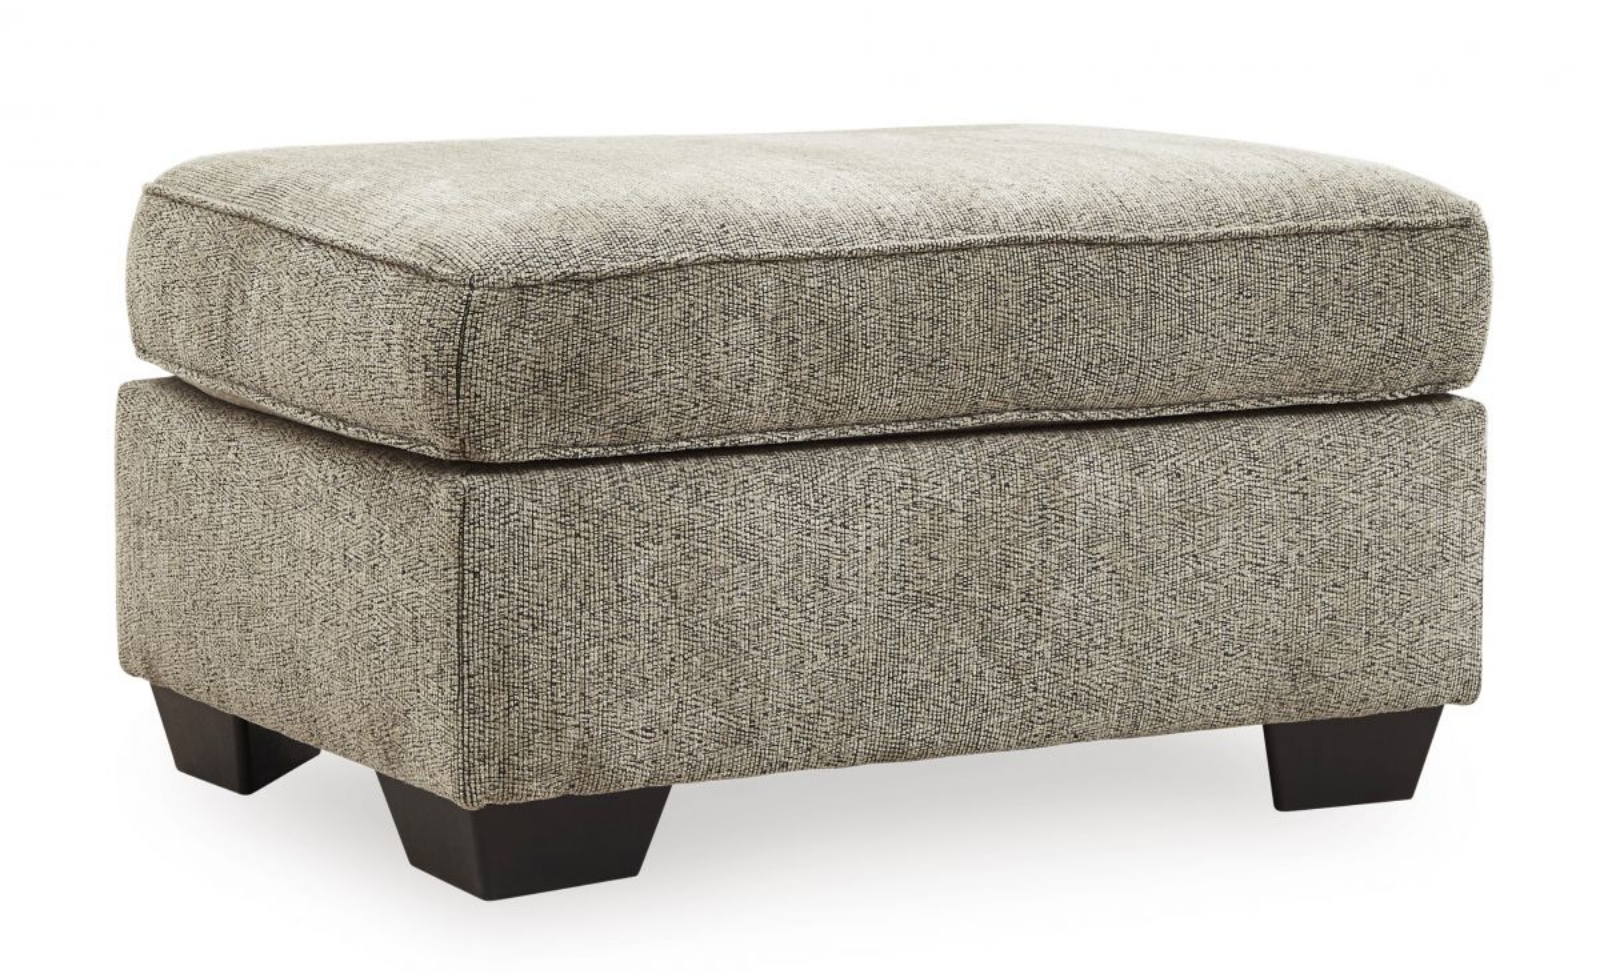 Picture of McCluer Ottoman